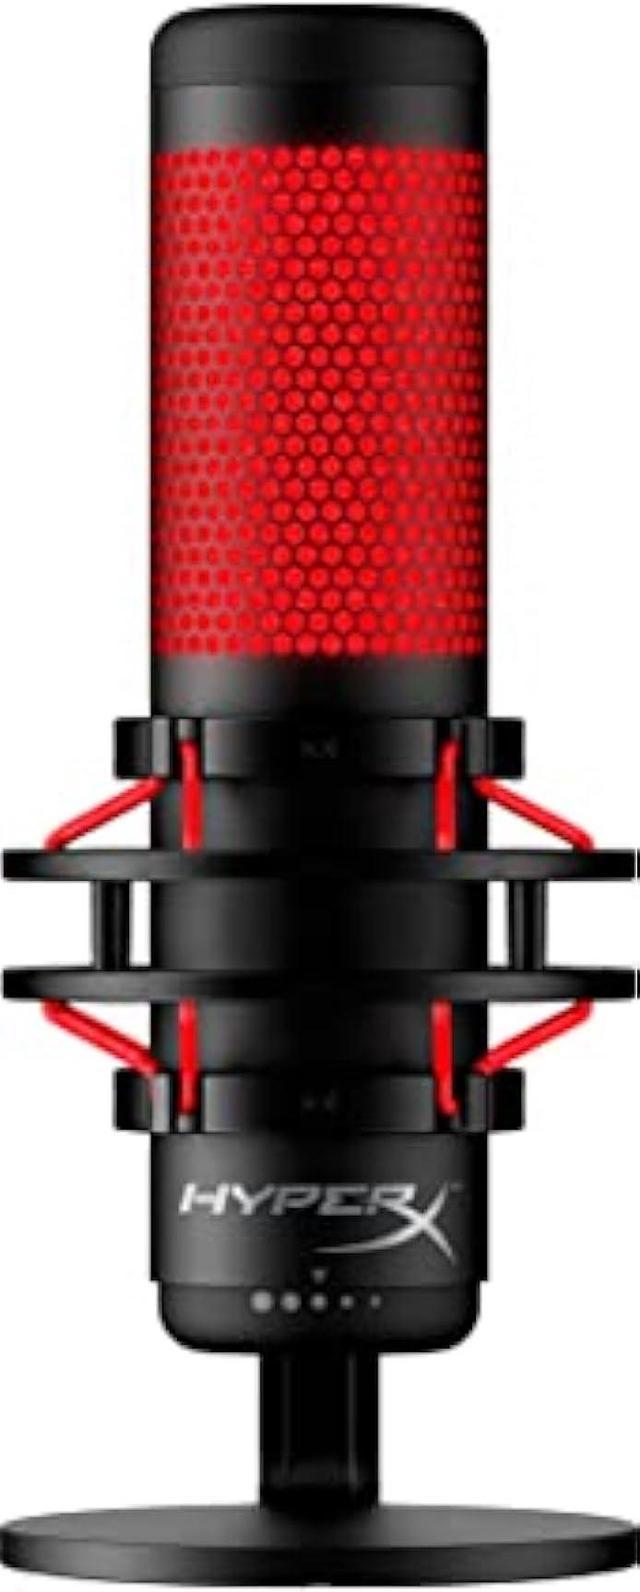  HyperX QuadCast - USB Condenser Gaming Microphone, for PC, PS4,  PS5 and Mac, Anti-Vibration Shock Mount, Four Polar Patterns, Pop Filter,  Gain Control, Podcasts, Twitch, , Discord, Red LED